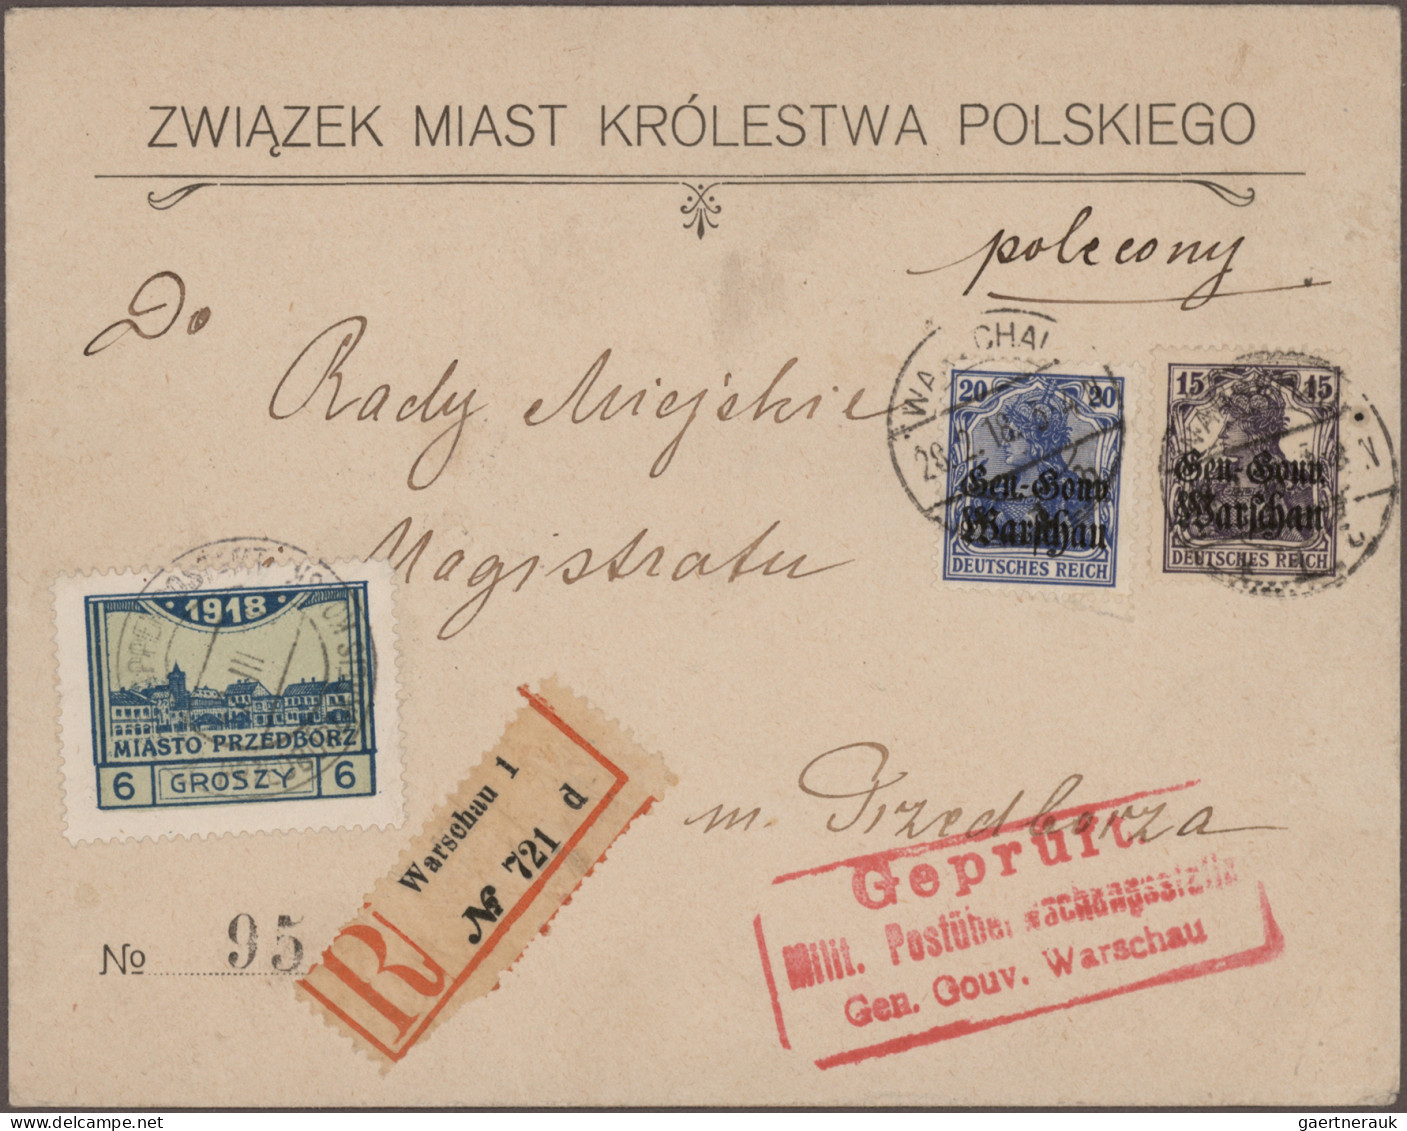 Poland: 1915/1918, Warsaw and Przedborz (mainly), group of eleven entires and al